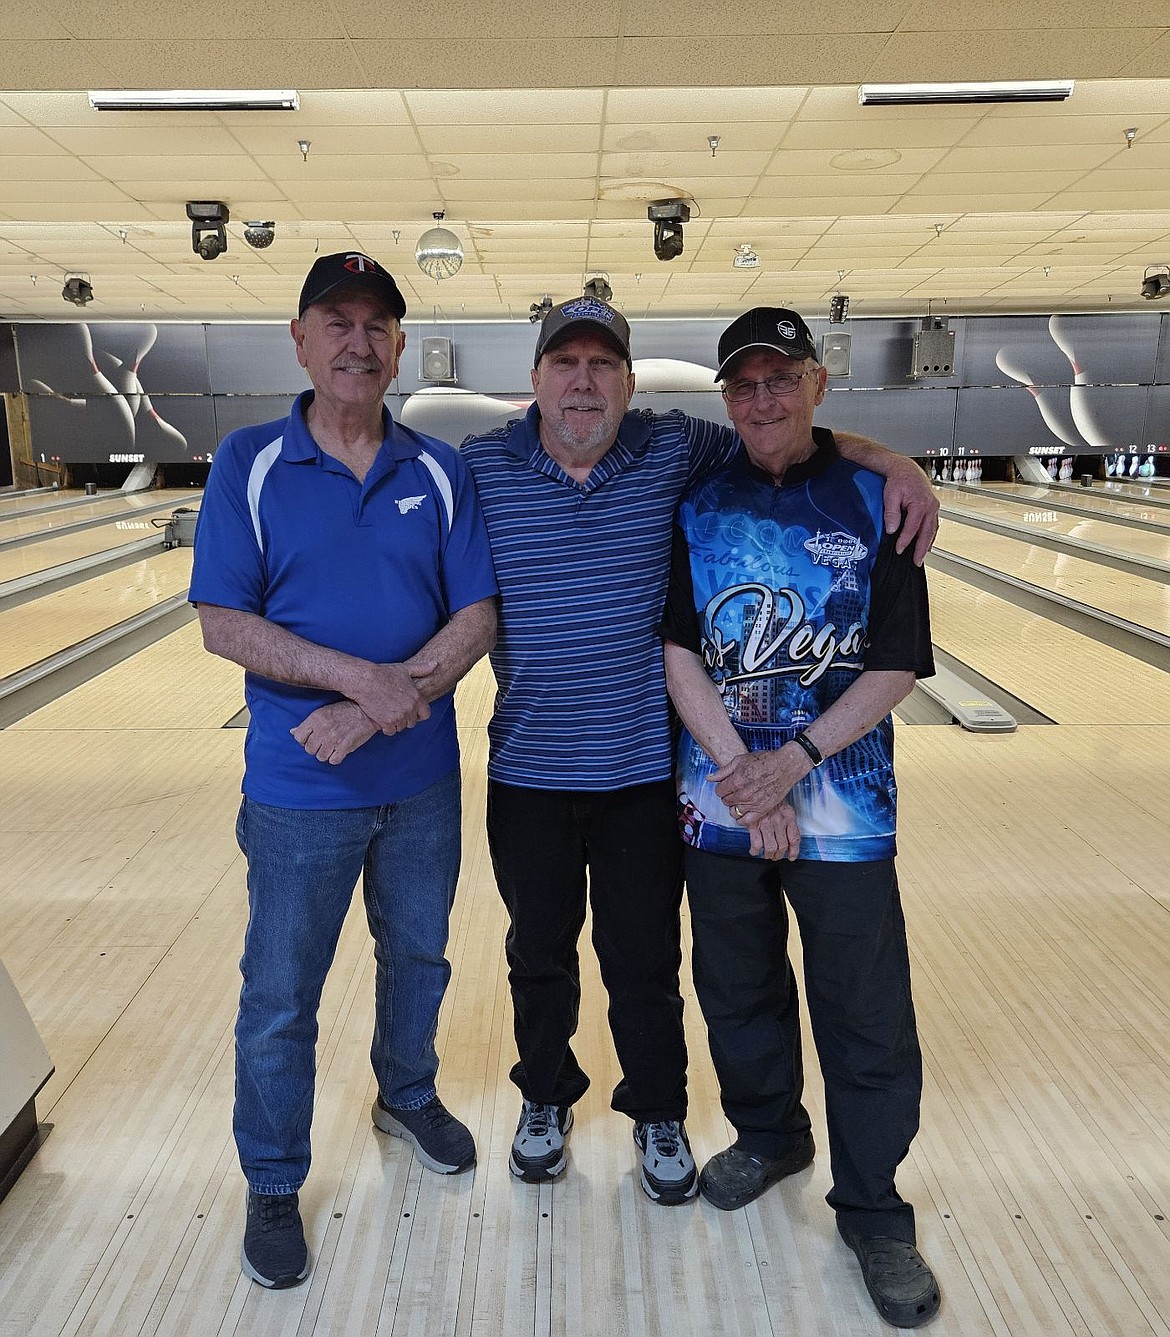 Courtesy photo
Joe Flinn and Group won the recent Grandfather's Tournament at Sunset Bowling Center in Coeur d'Alene. From left are Doug Eastwood (806 scratch score, Dale Motz (527) and Joe Flinn (650). Second place went to Aging Flatulence Rob Stratton Jr. (750), Terry Dolan (655) and Ron Jacobson (689).